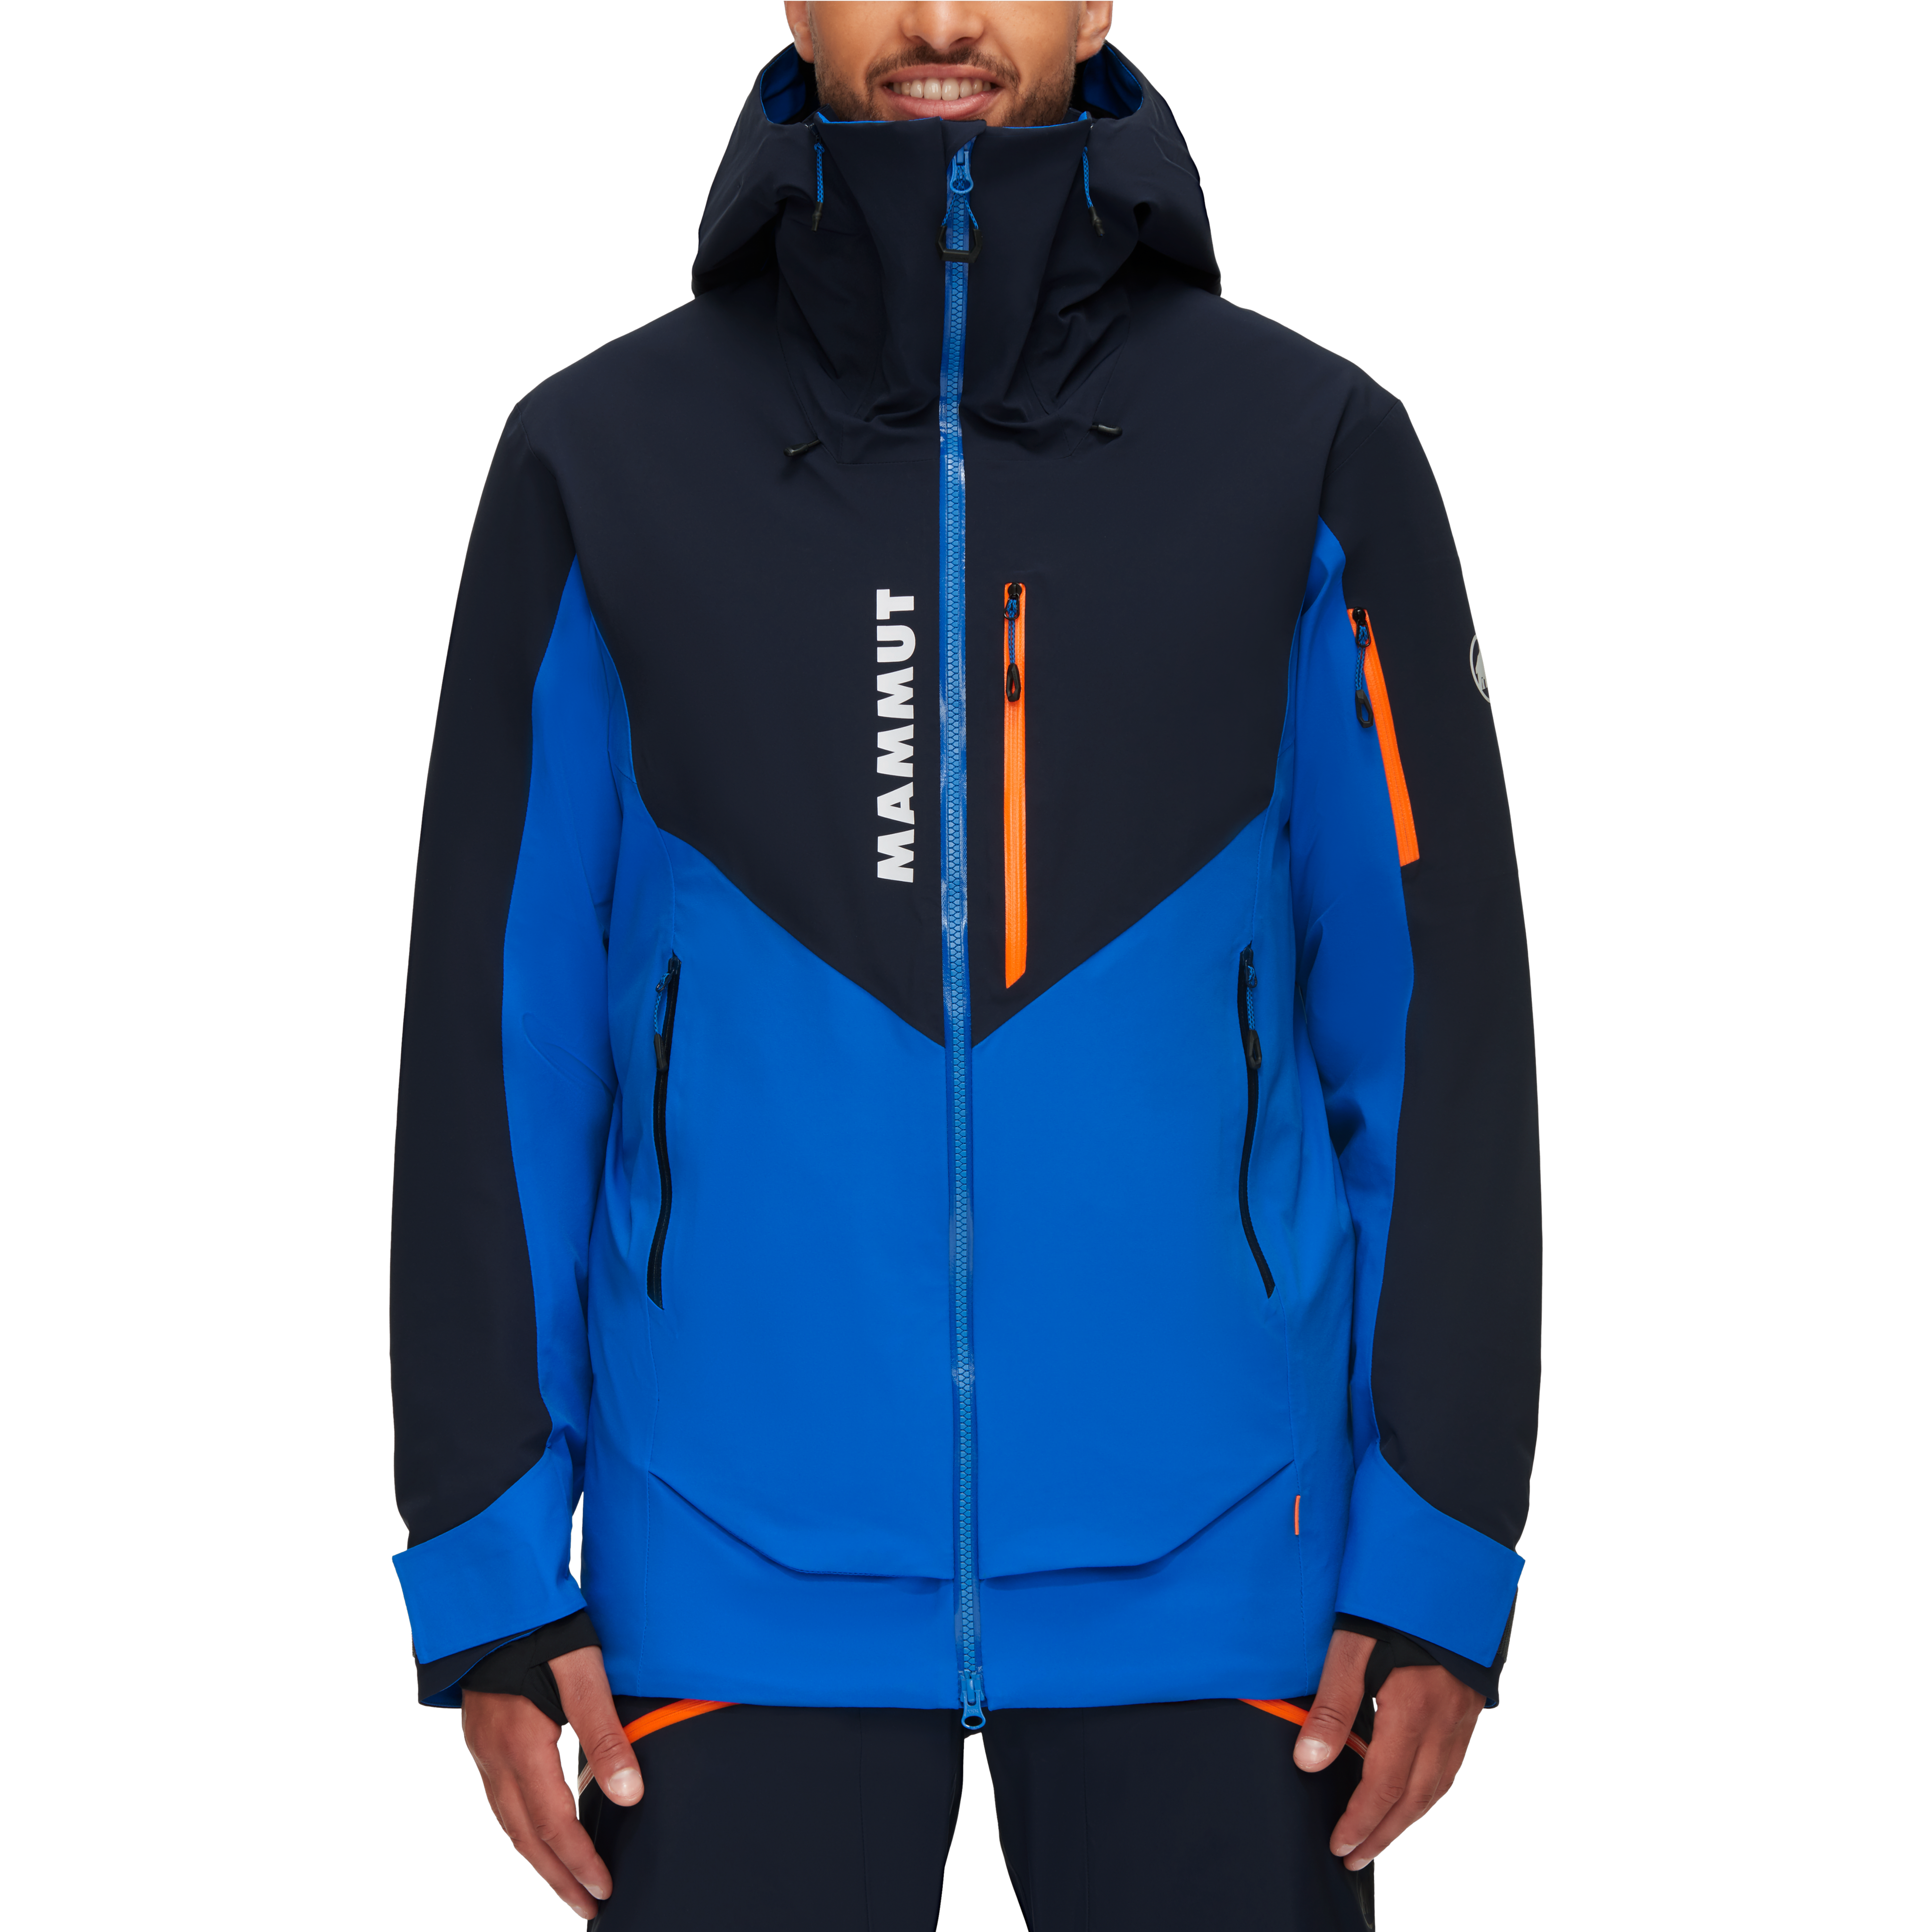 La Liste HS Thermo Hooded Jacket Men product image